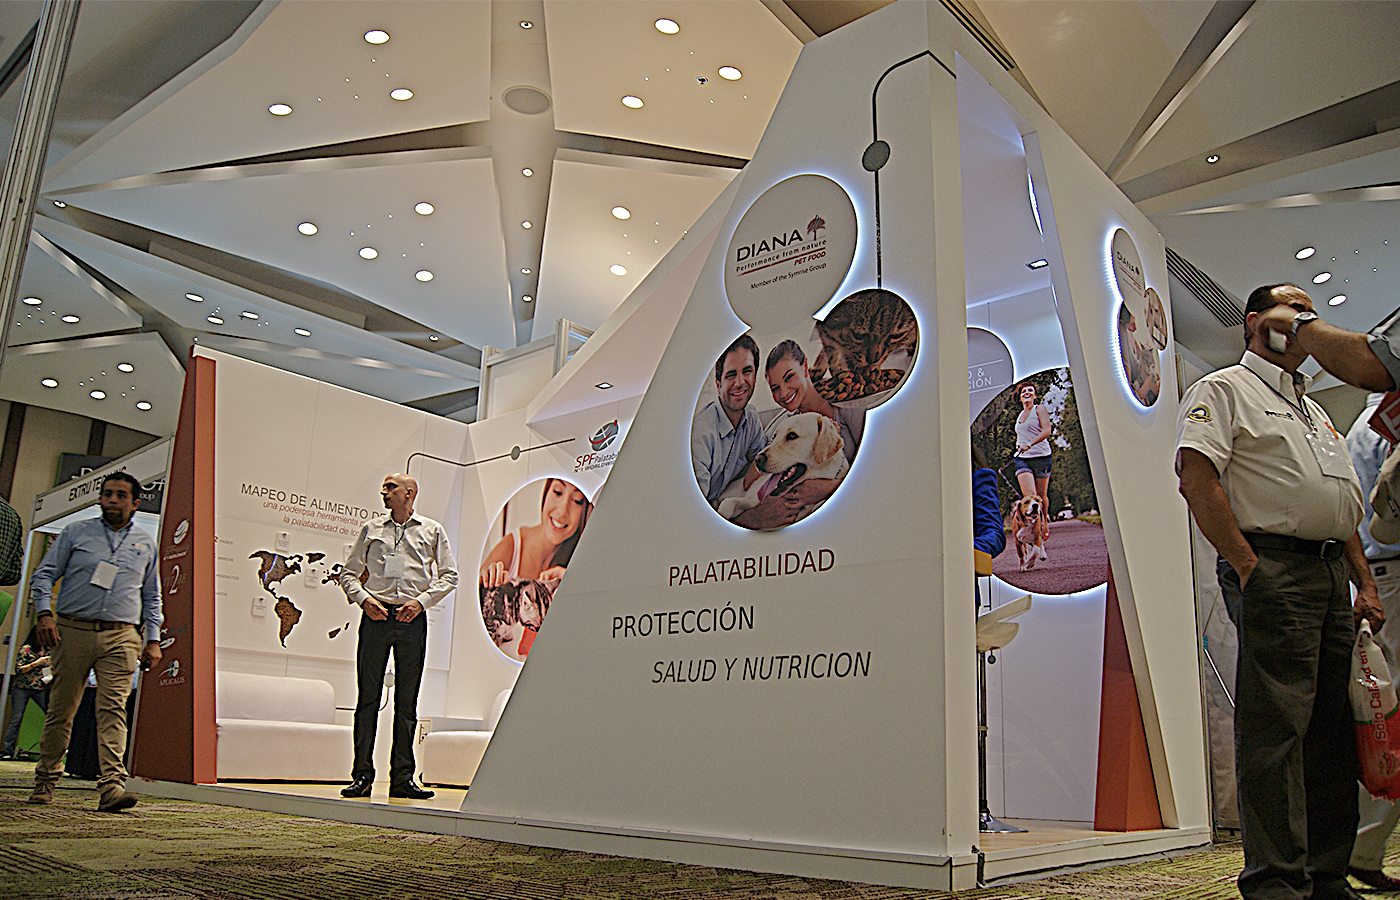 Stand Exhibition  expo booth DIANA PETFOOD FORO AMEPA 2015